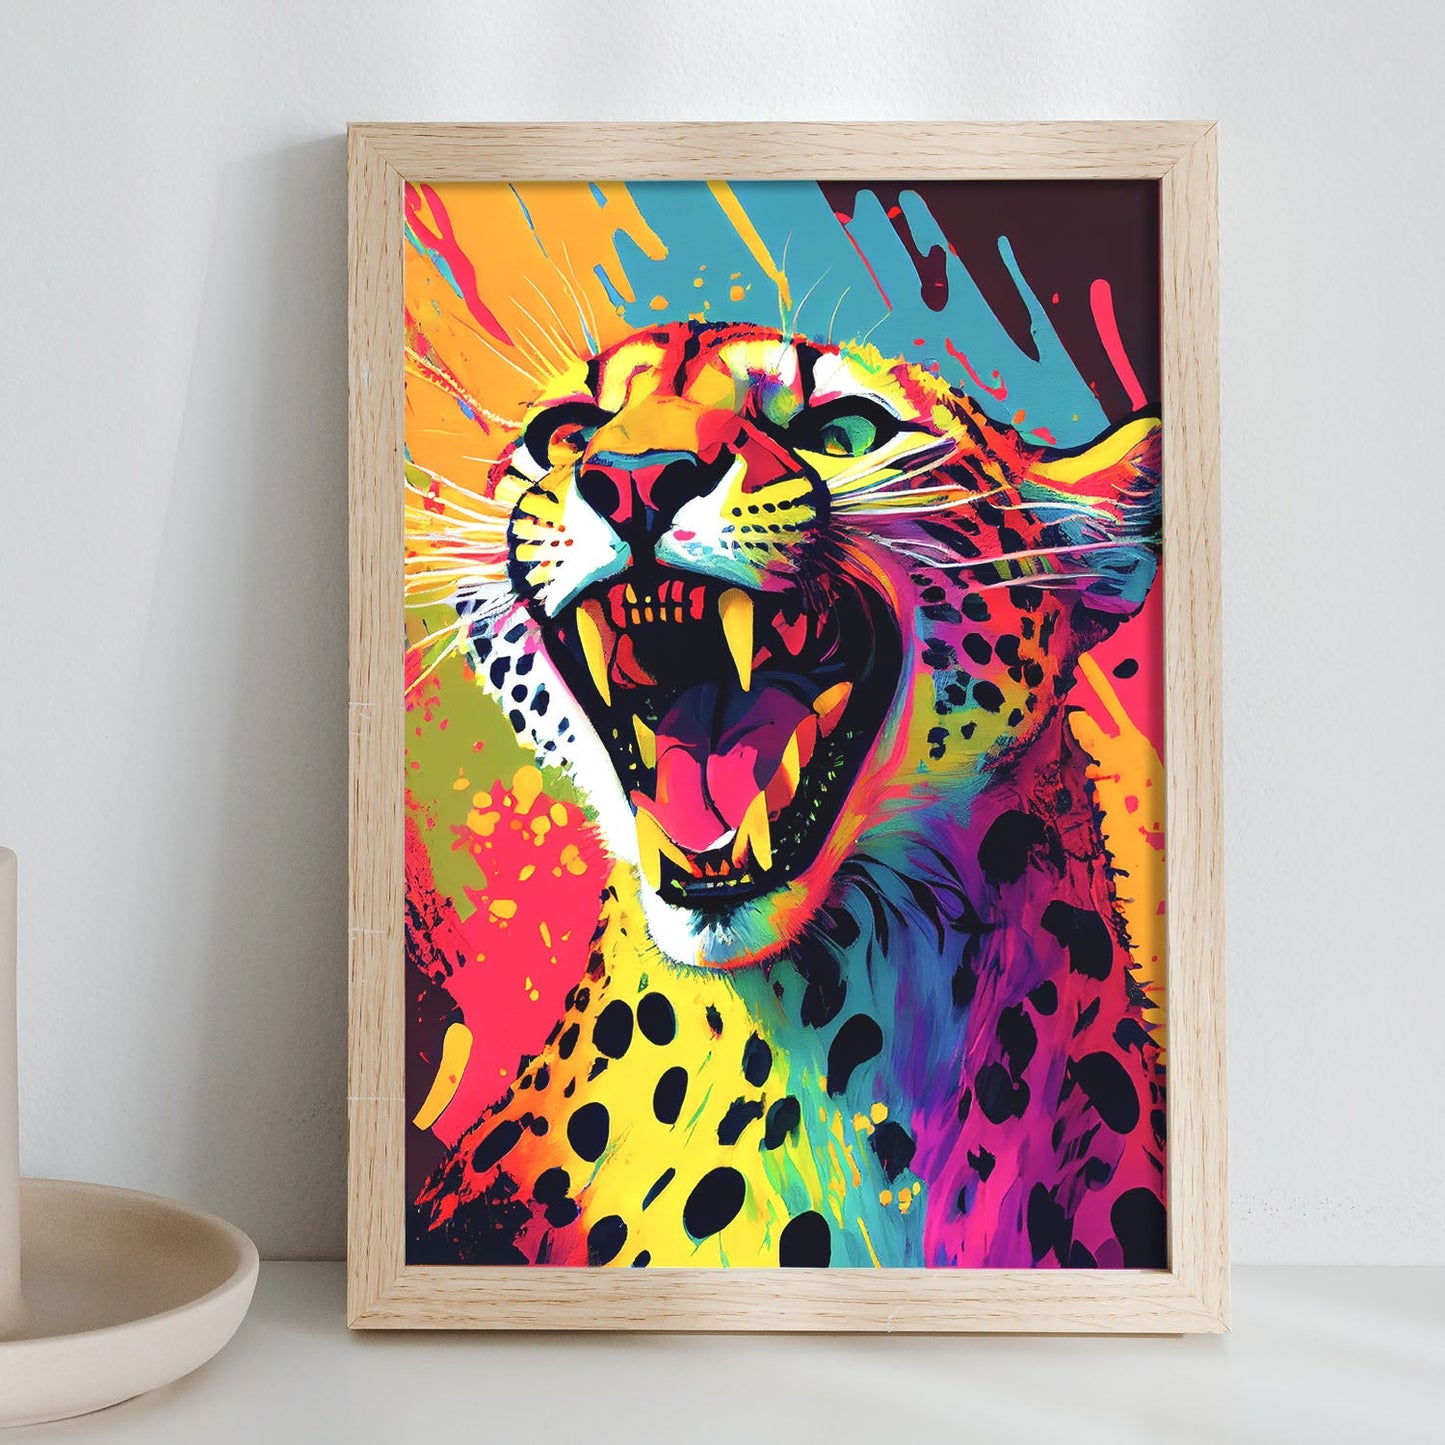 Nacnic Abstract smiling Cheetah in Lisa Fran Style_2. Aesthetic Wall Art Prints for Bedroom or Living Room Design.